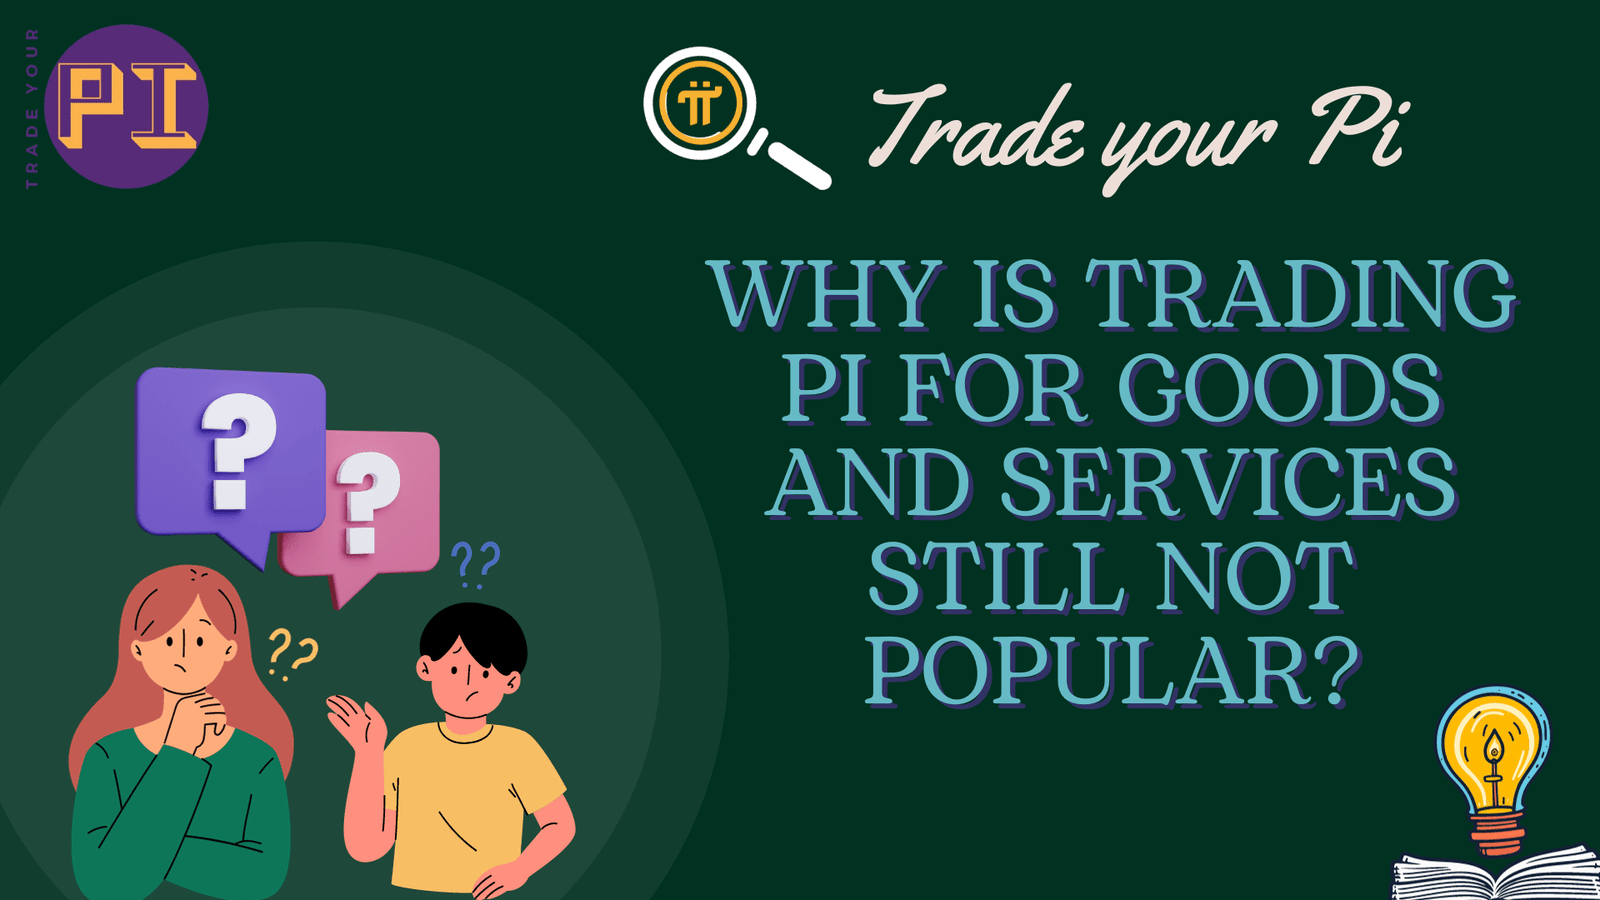 Pi Trade Challenges: Unlocking Trade Your Pi Insights